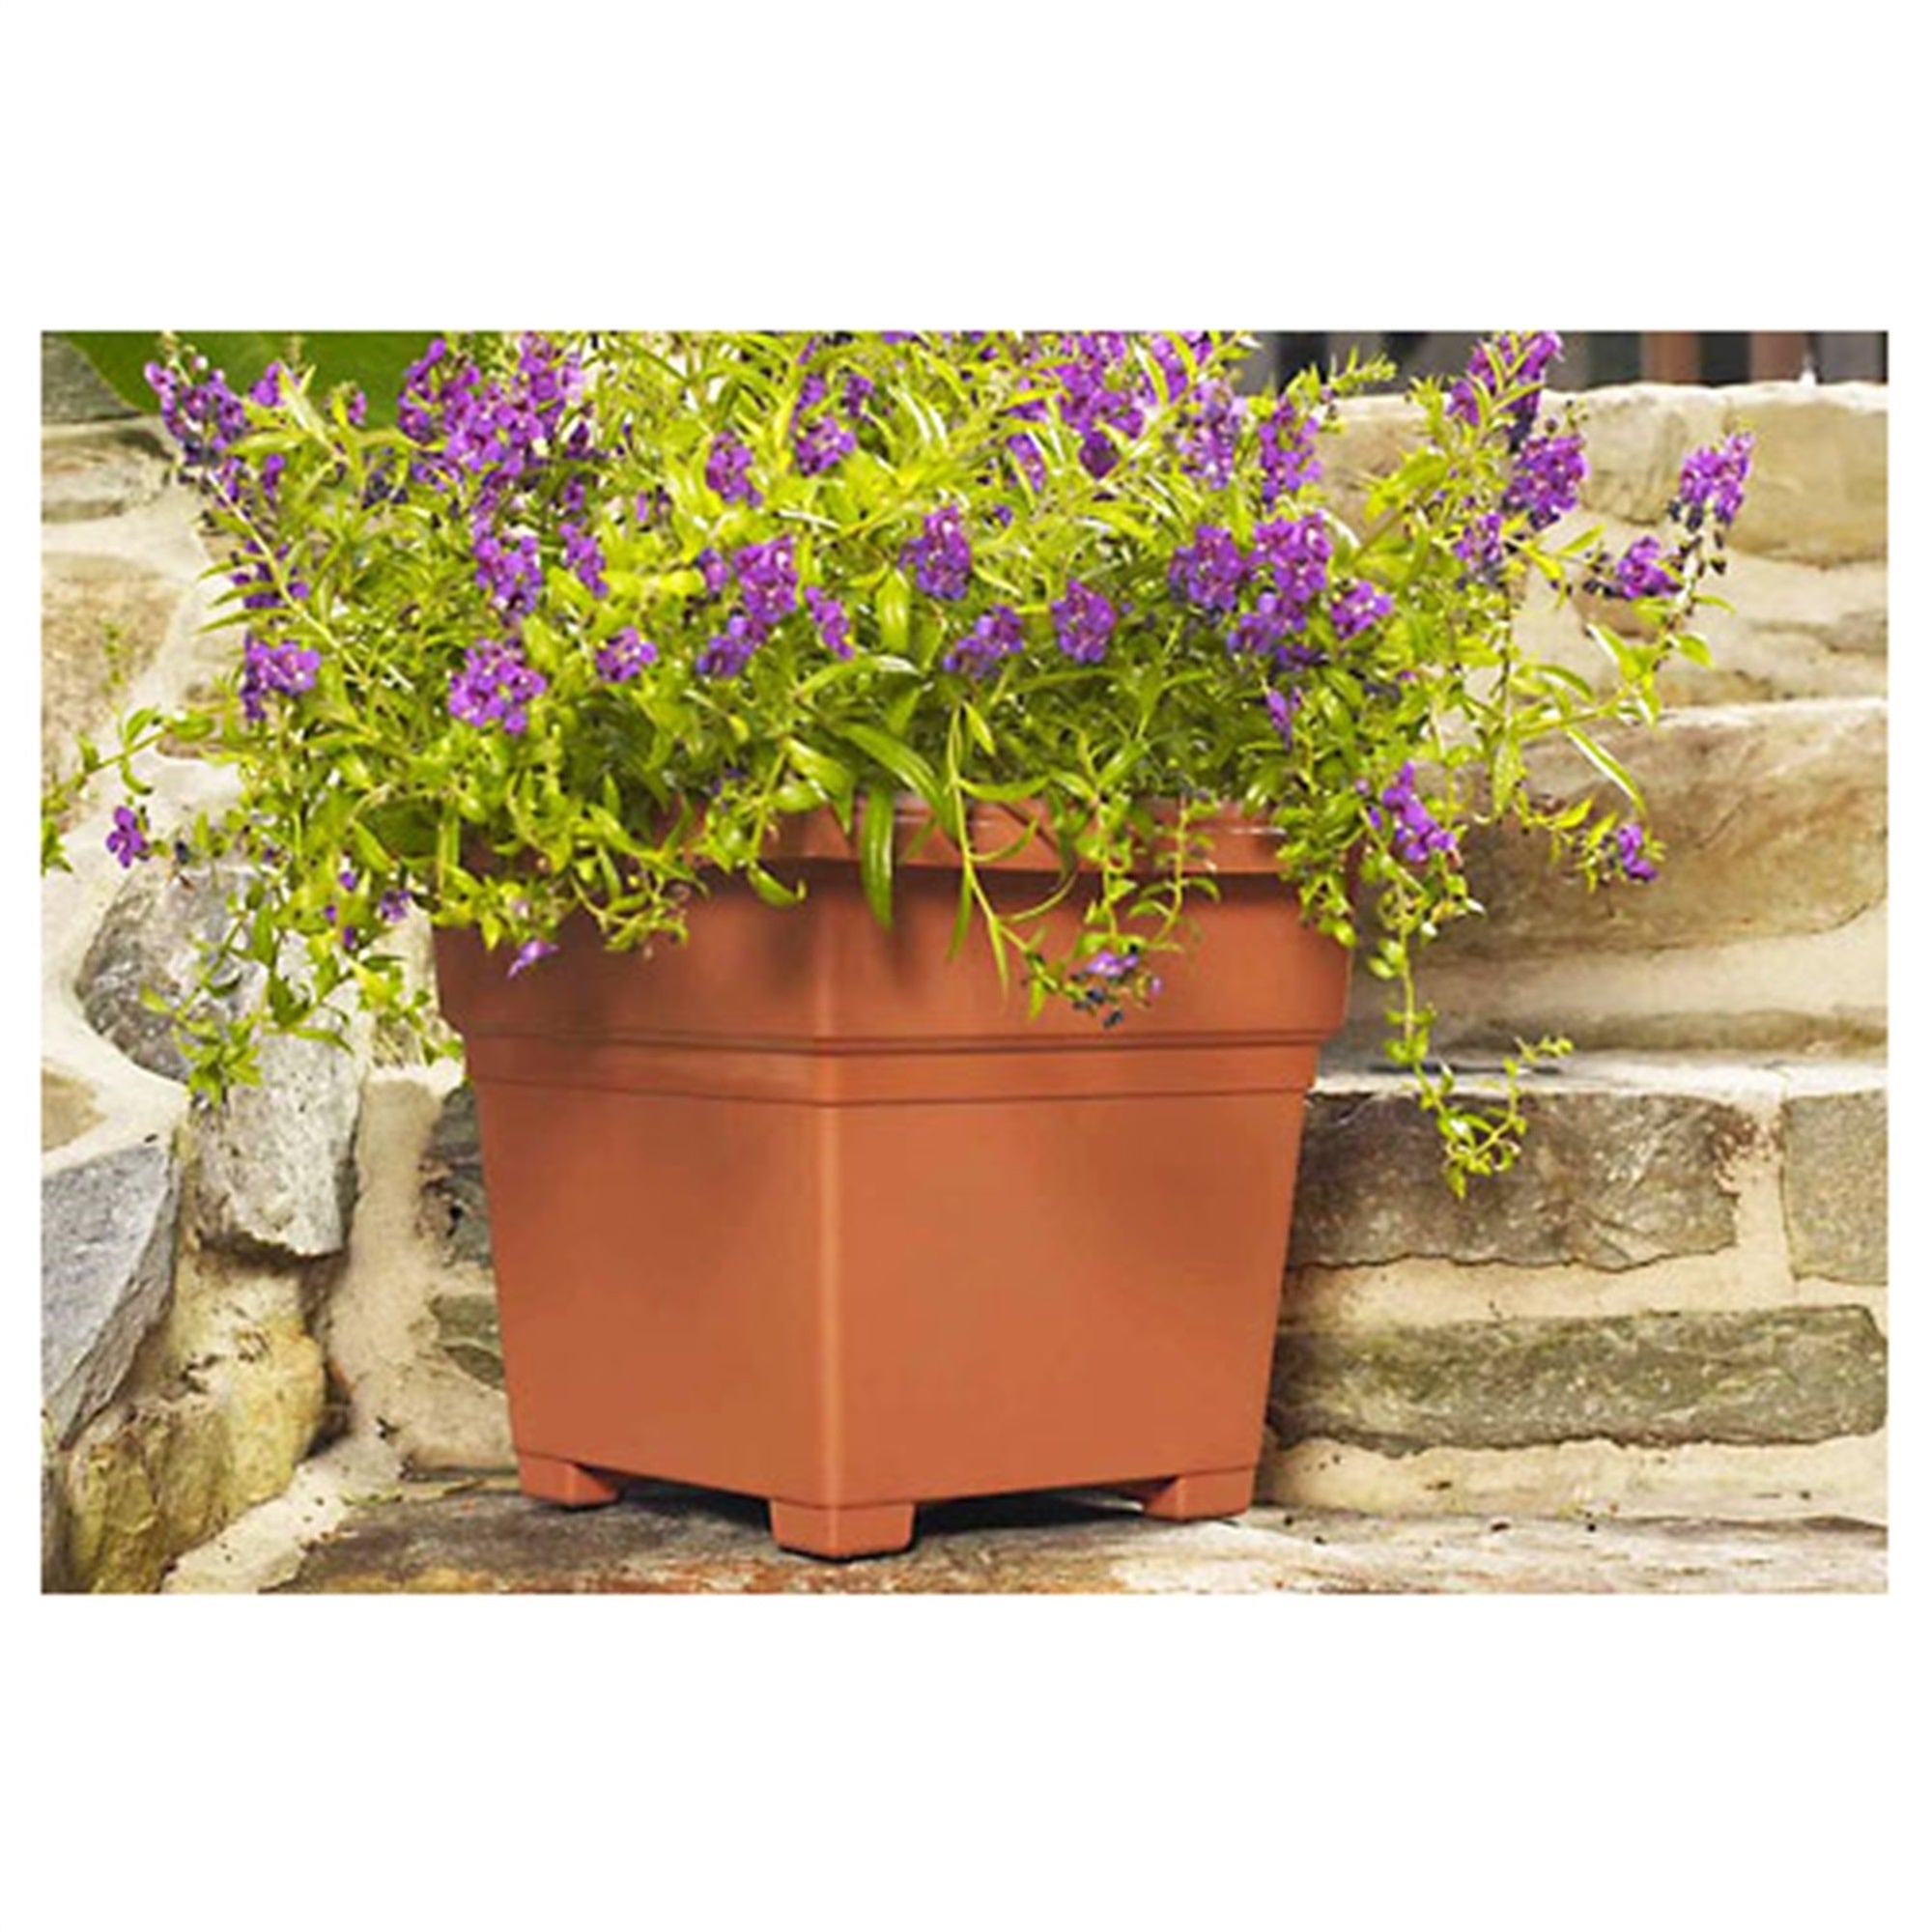 Novelty Countryside Square Tub Planter, Sage 14"